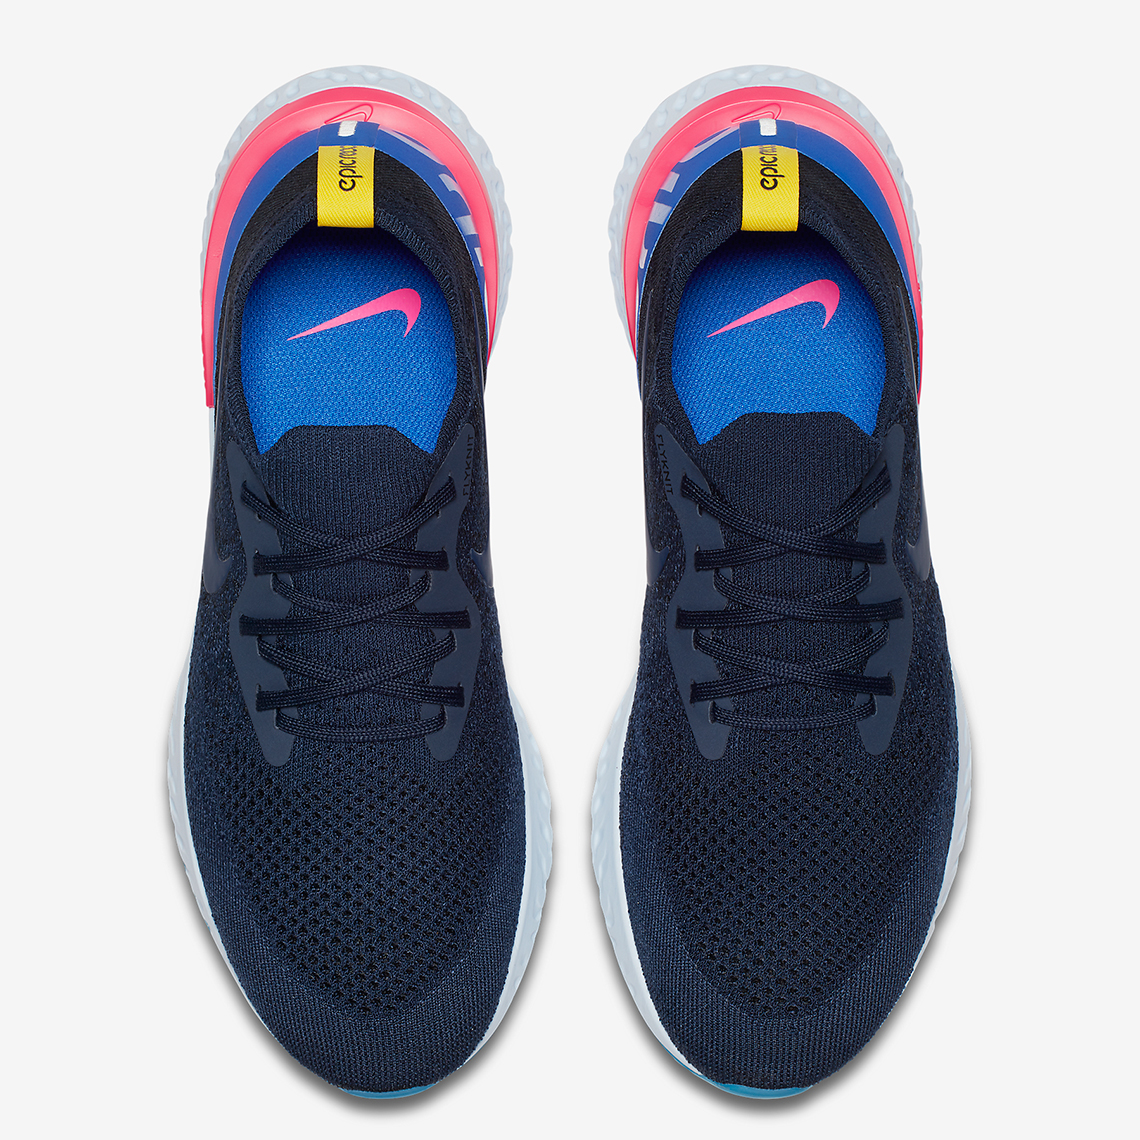 nike-epic-react-release-info-official-images-8.jpg